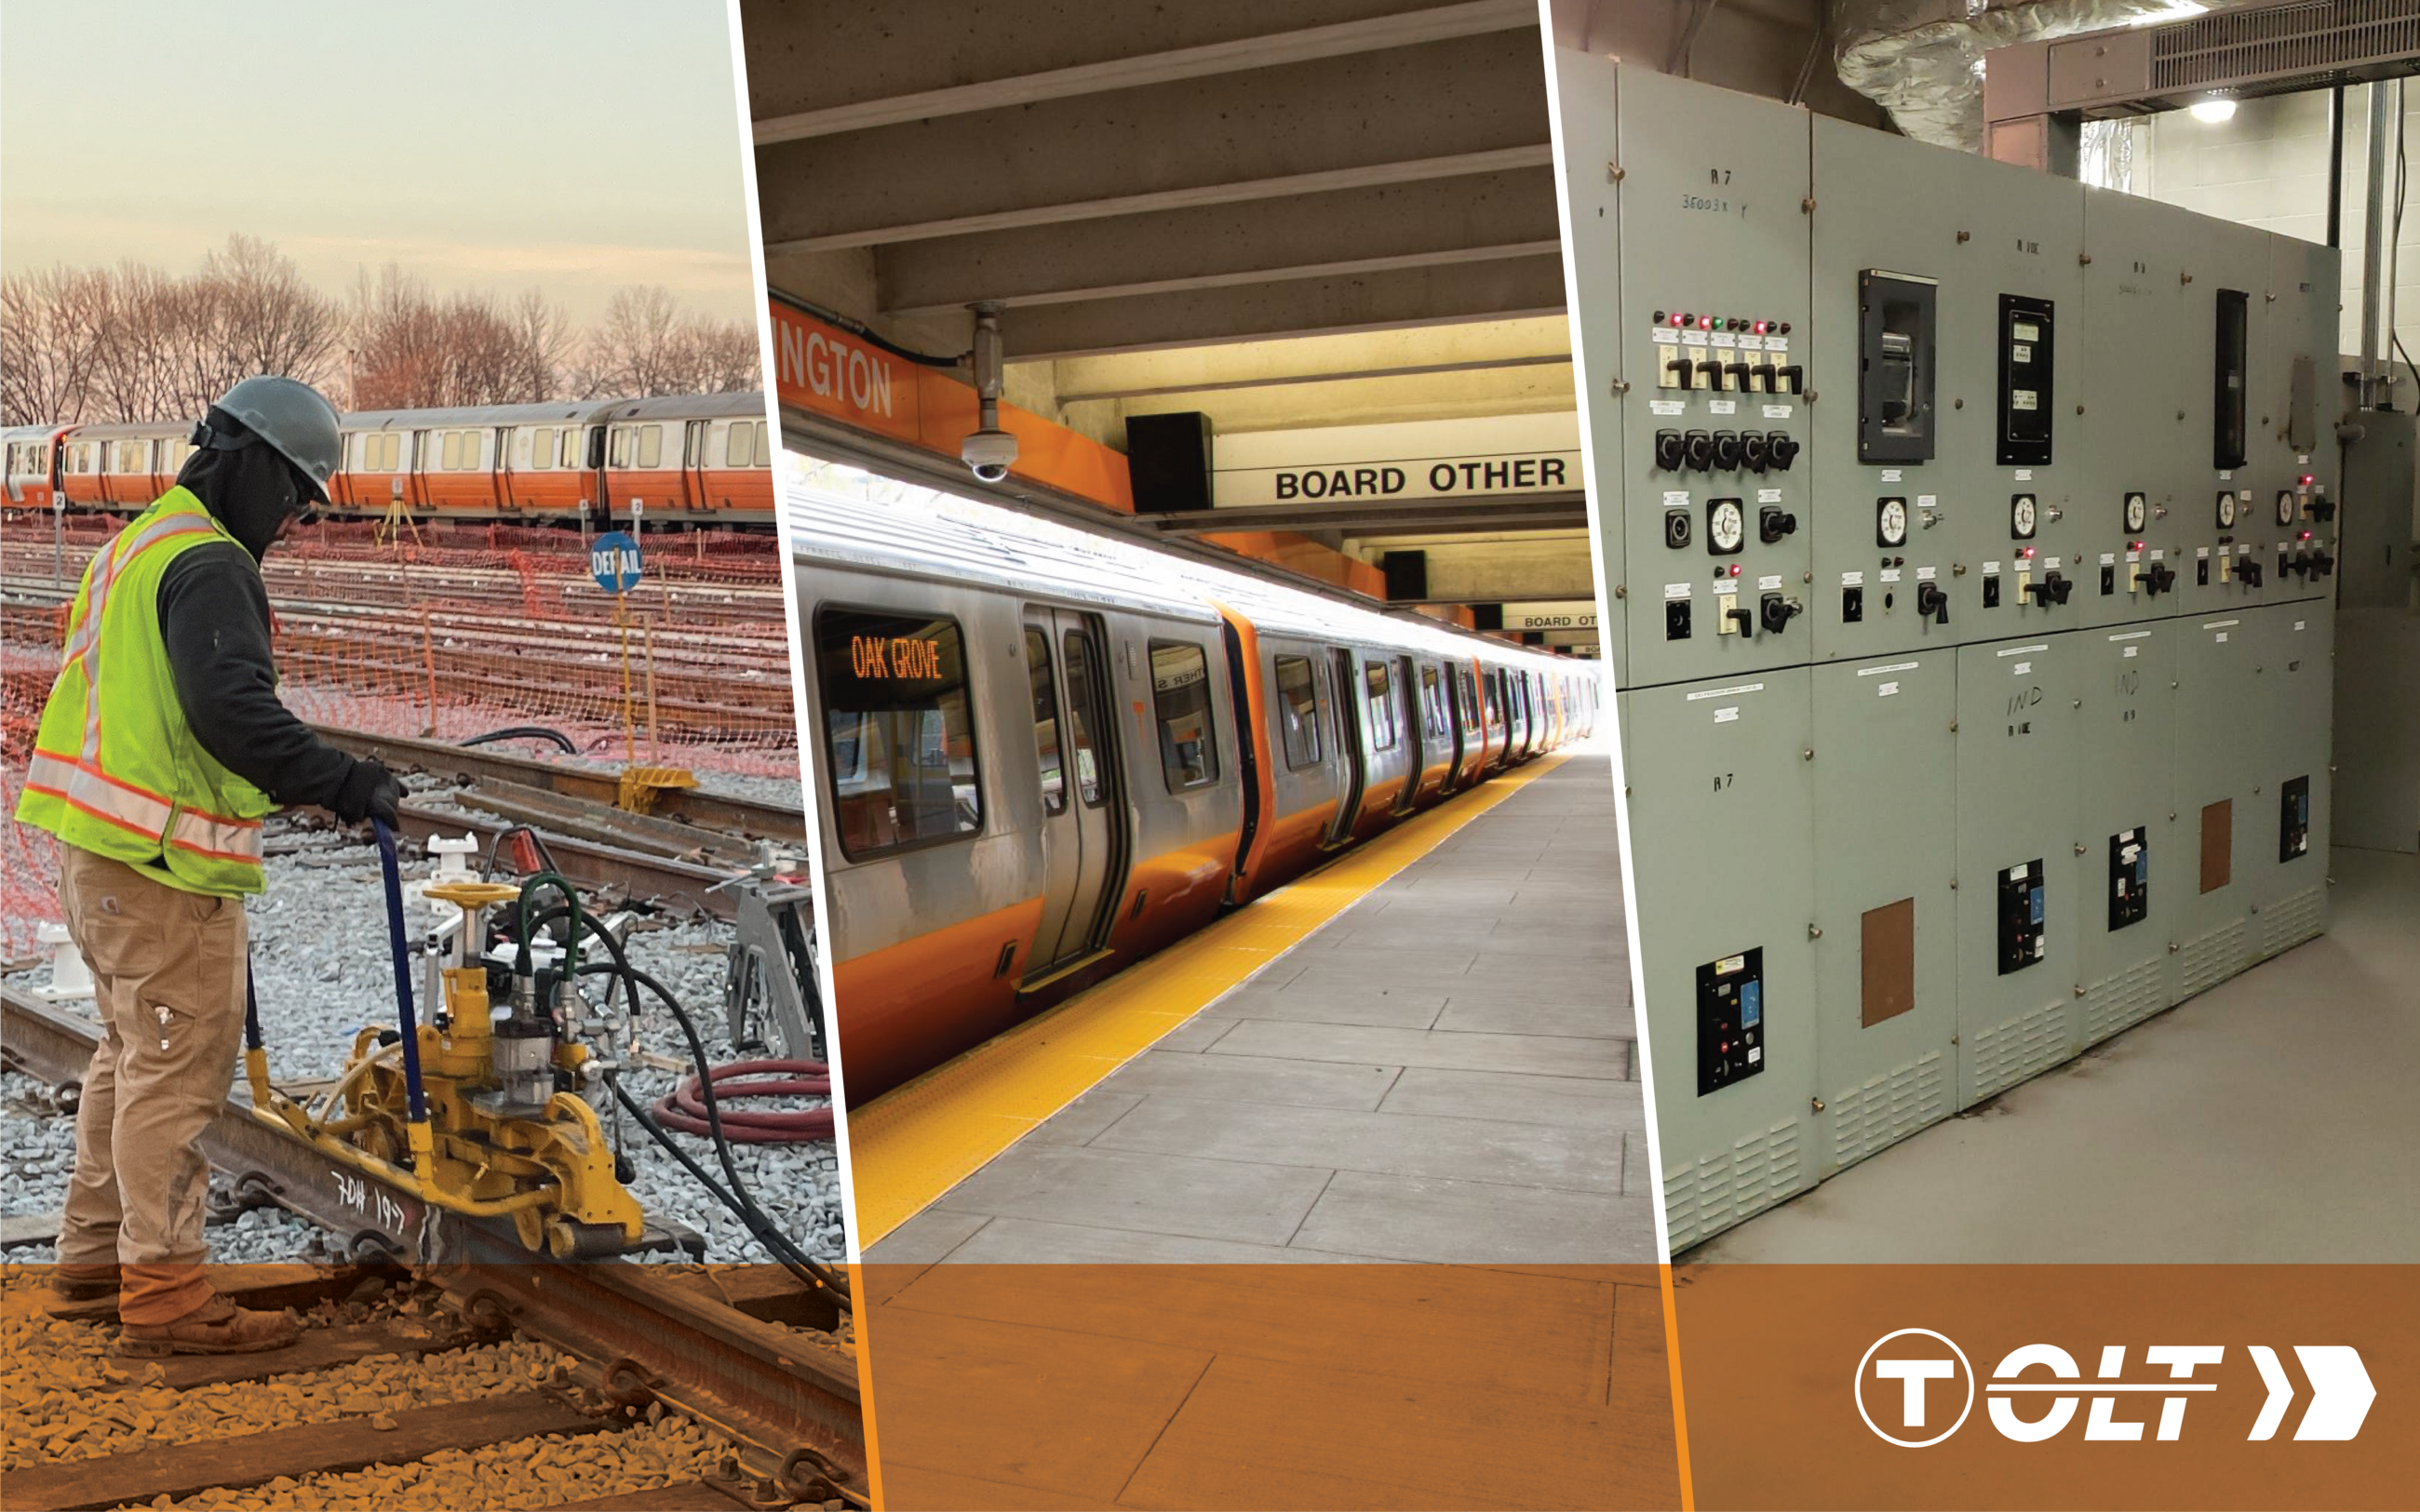 A photo of a construction worker with machinery on tracks, a photo of a new orange line train, and a photo of signal boxes, with an OLT logo banner at the bottom going across all three